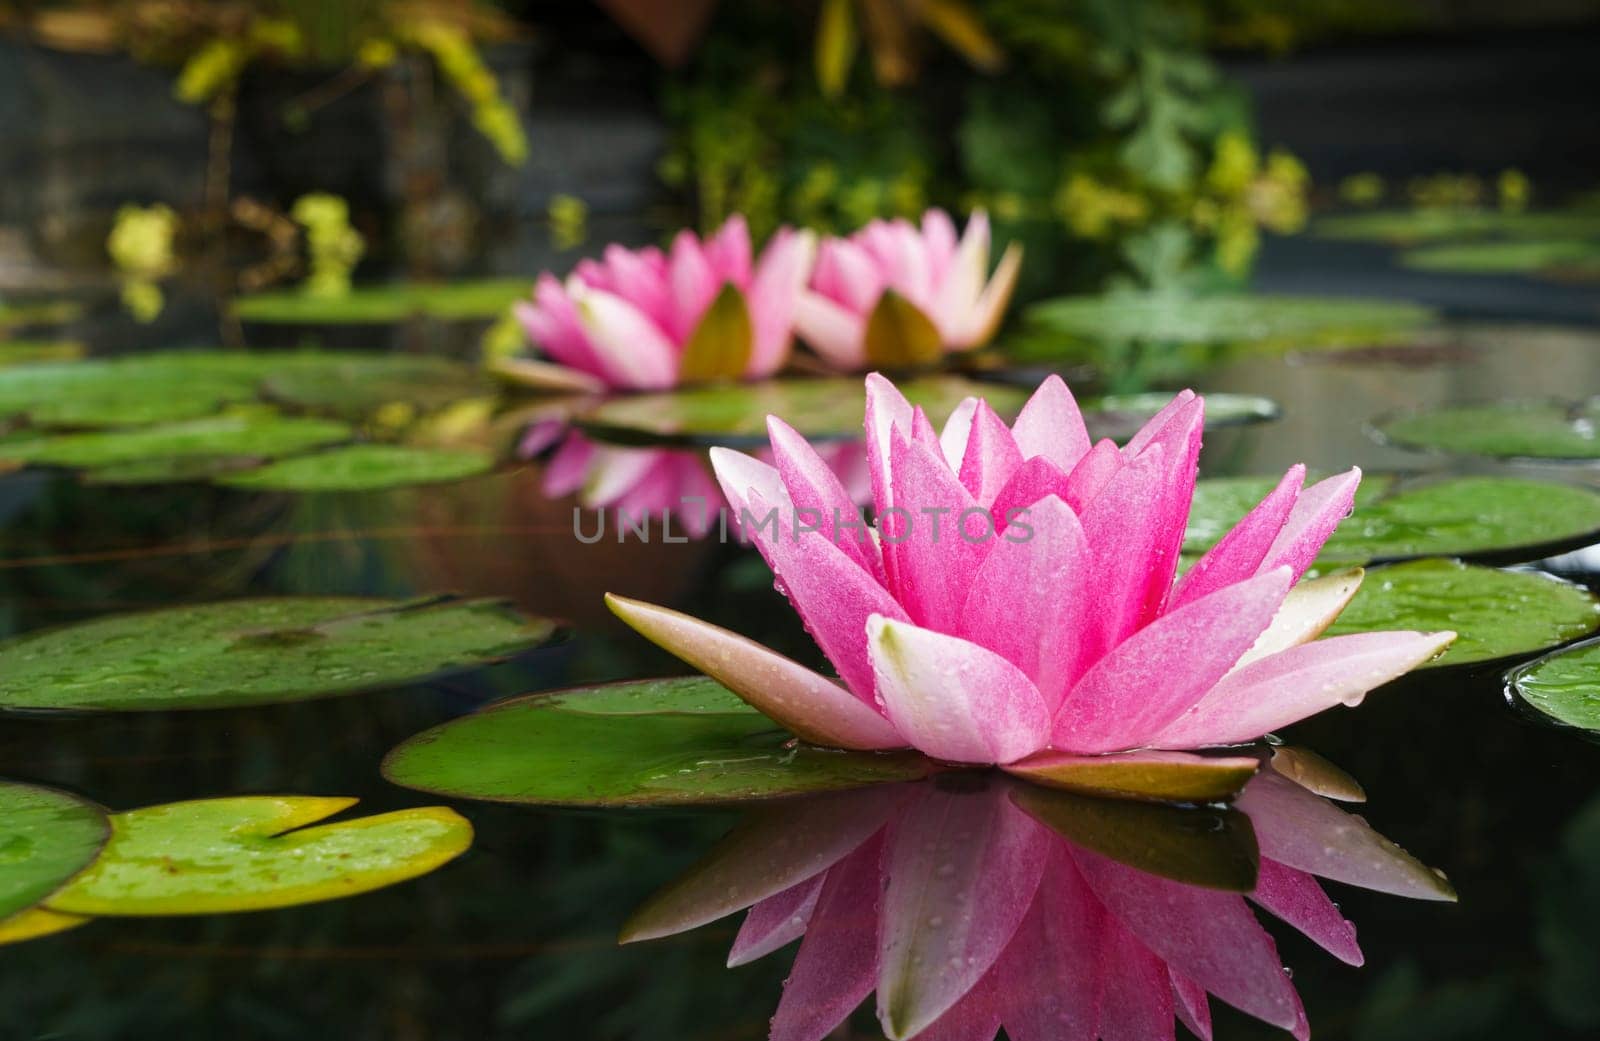 Water lily flower in shades of pink with green leaves in a pool of water. by csbphoto